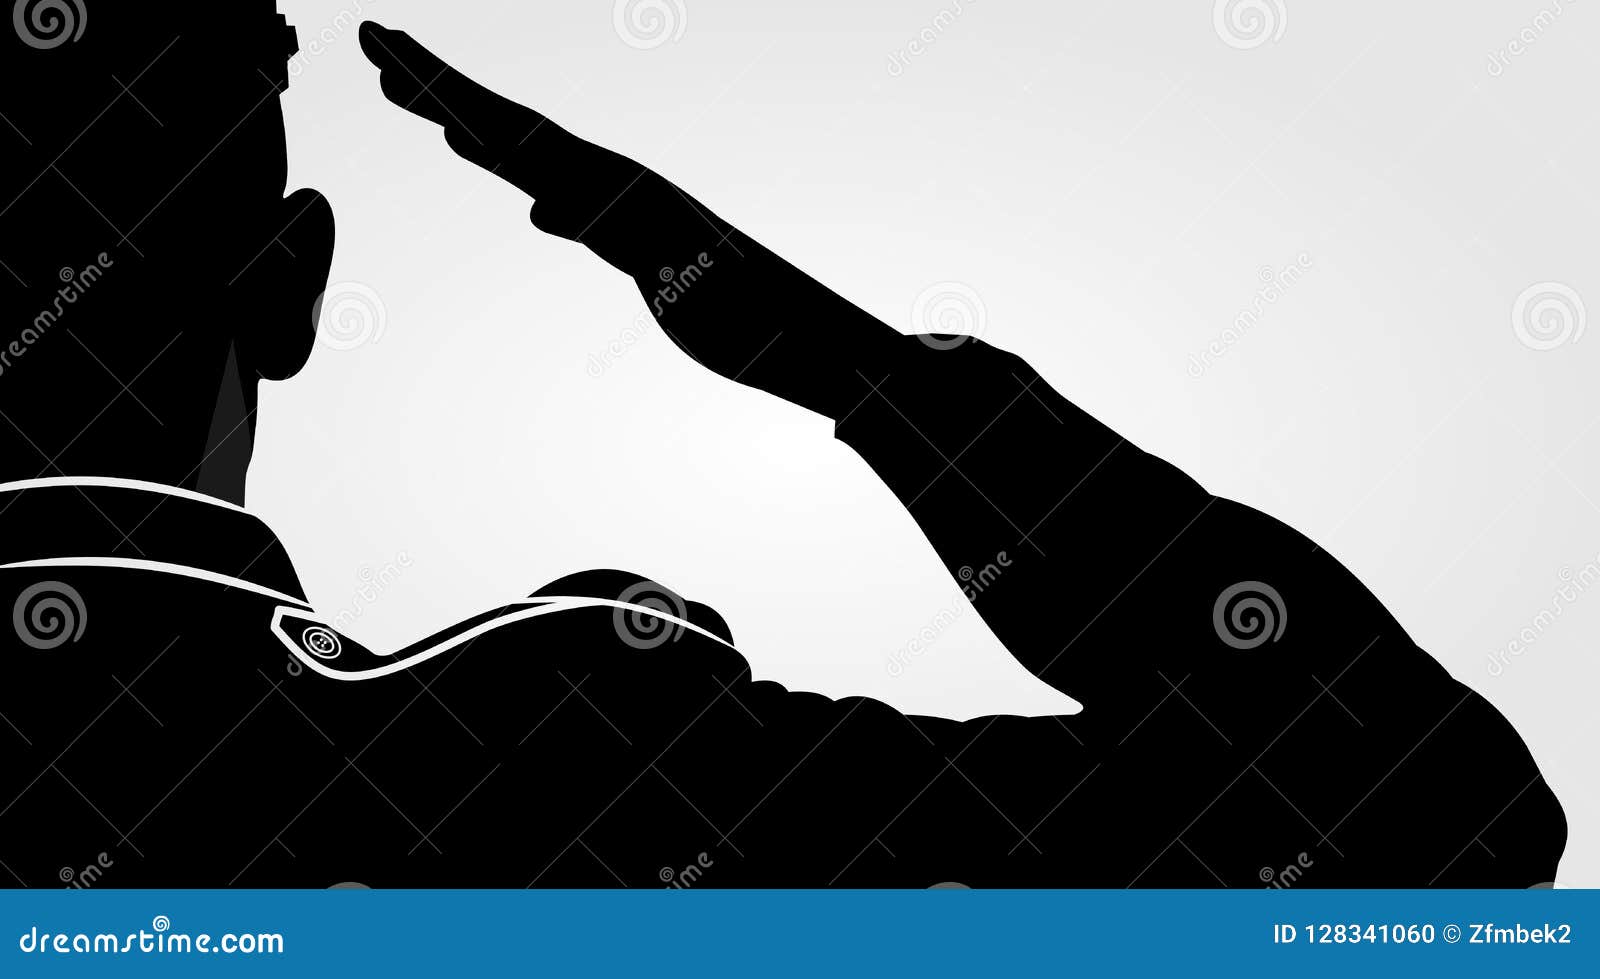 soldier, officer saluting silhouette.